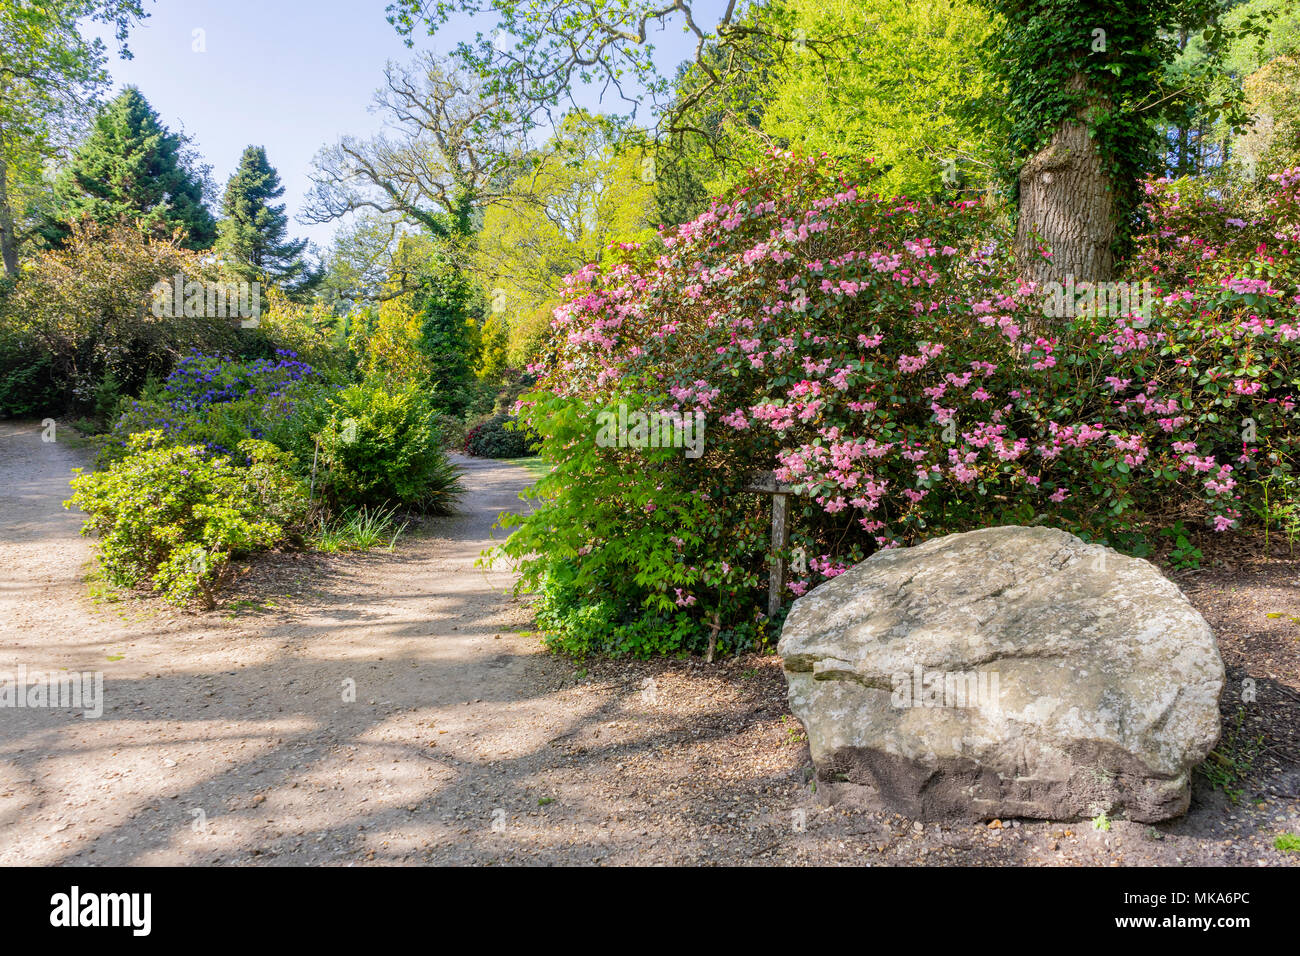 The Rock garden during spring in the grounds of Exbury gardens, a large woodland garden belonging to the Rothschild family in Hampshire, England, UK Stock Photo